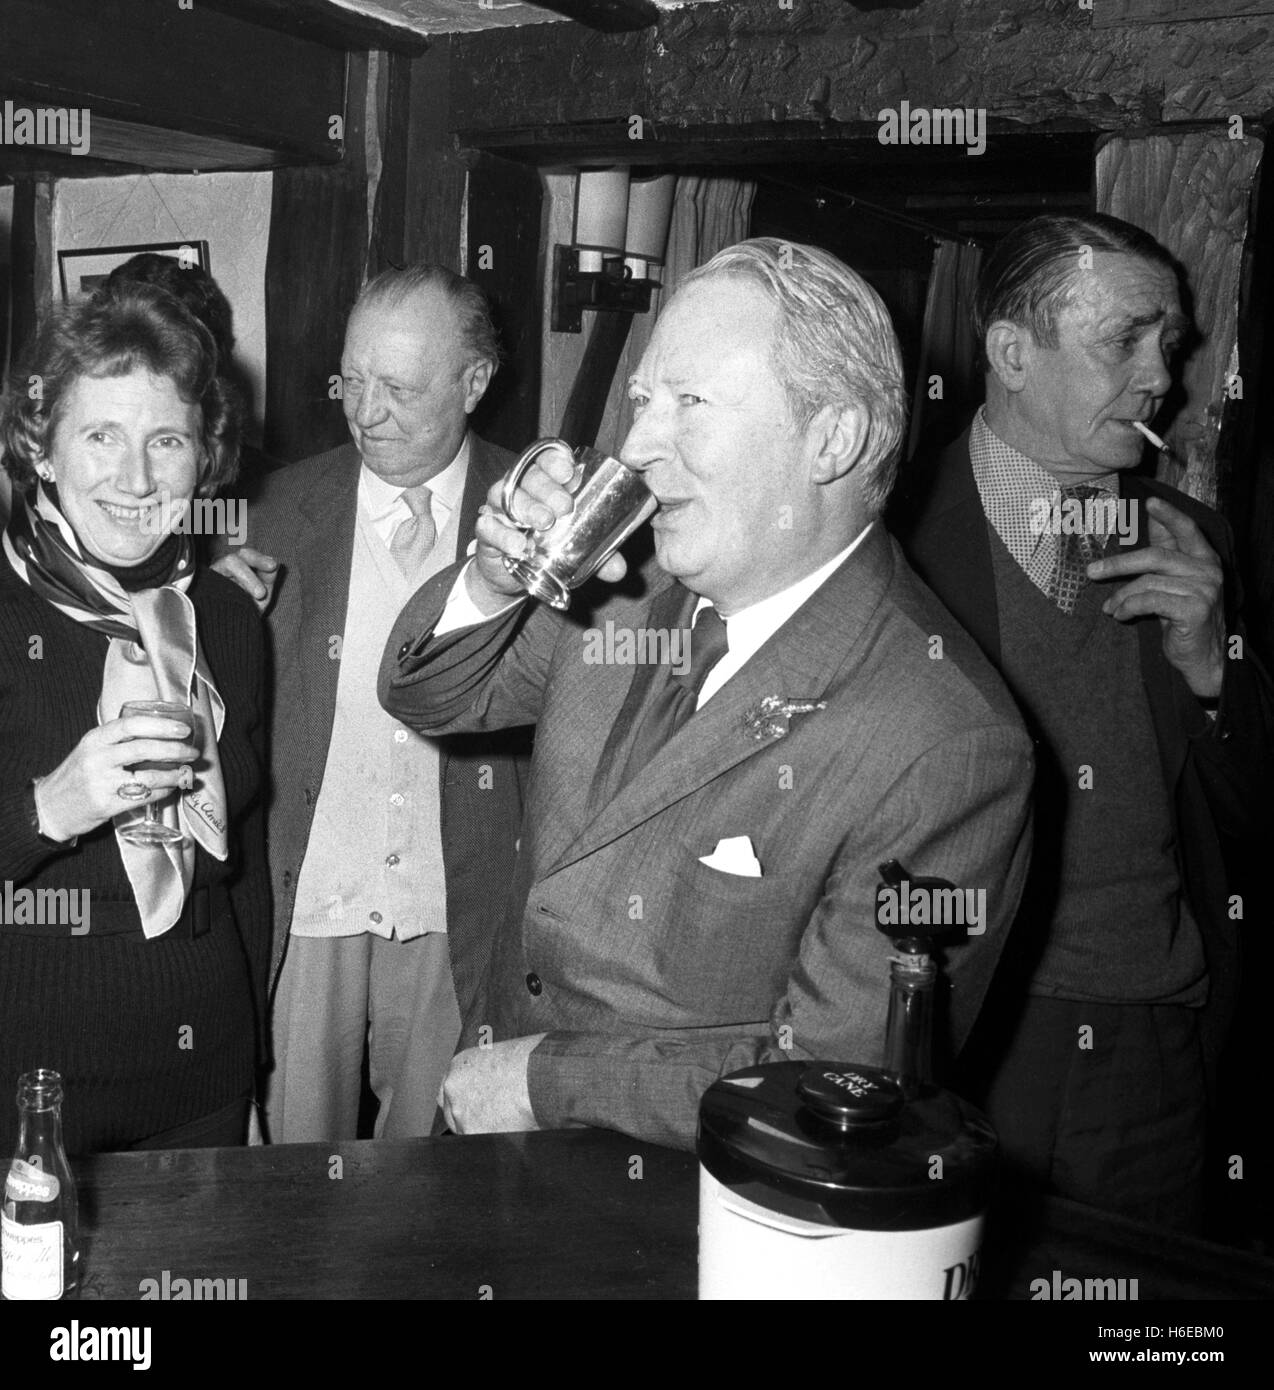 A lunchtime break for Prime Minister Edward Heath at the King's Head public house in Bexley, following a break in his tour of polling stations in his Sidcup constituency. PA AF 165380-171 Stock Photo